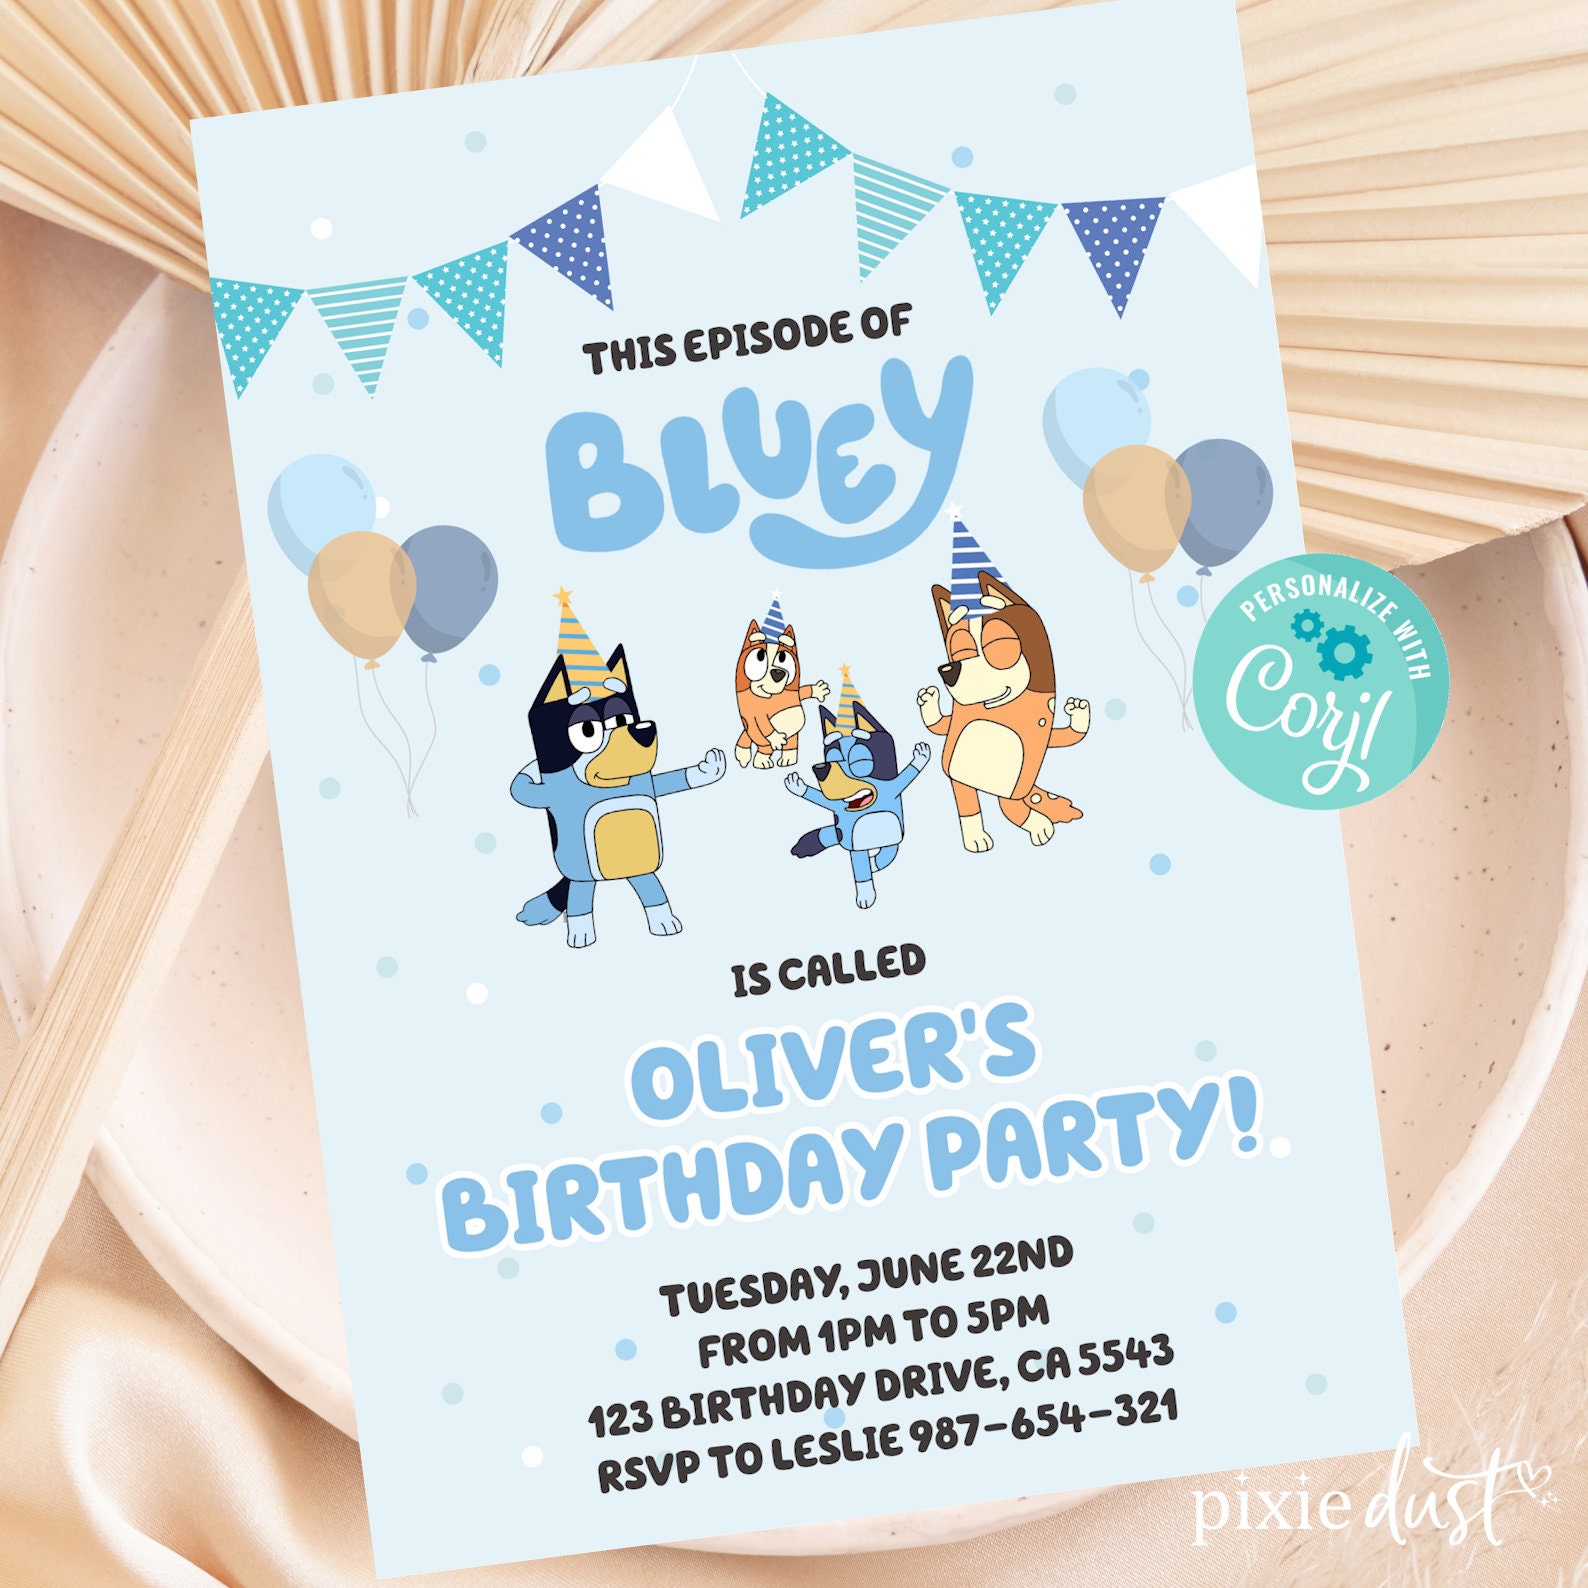 Bluey Birthday Party Supplies: Tableware and Decorations 